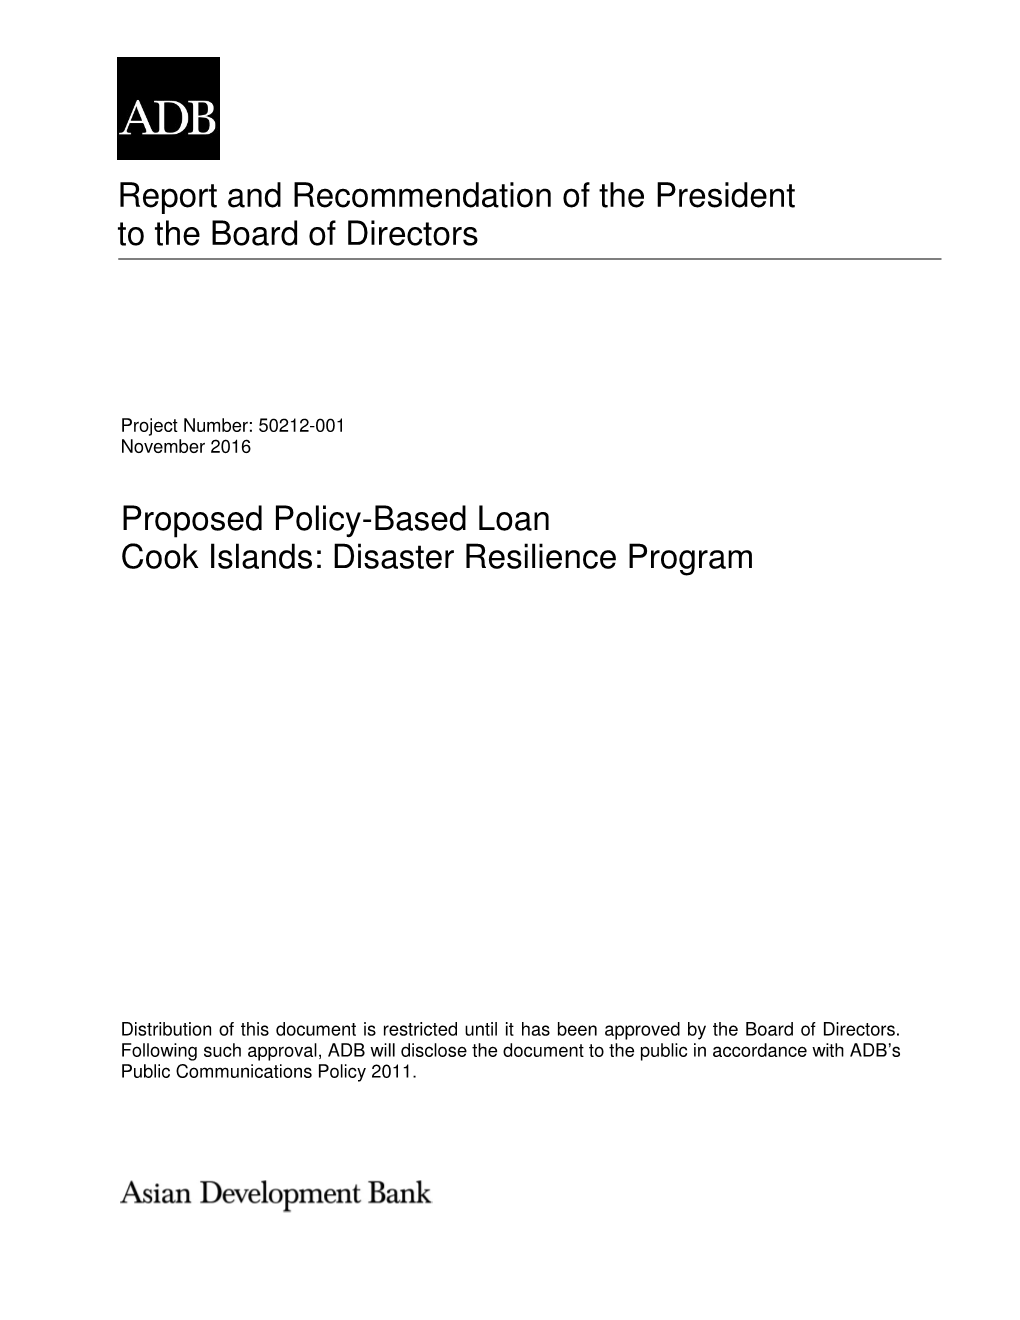 Report and Recommendation of the President to the Board of Directors